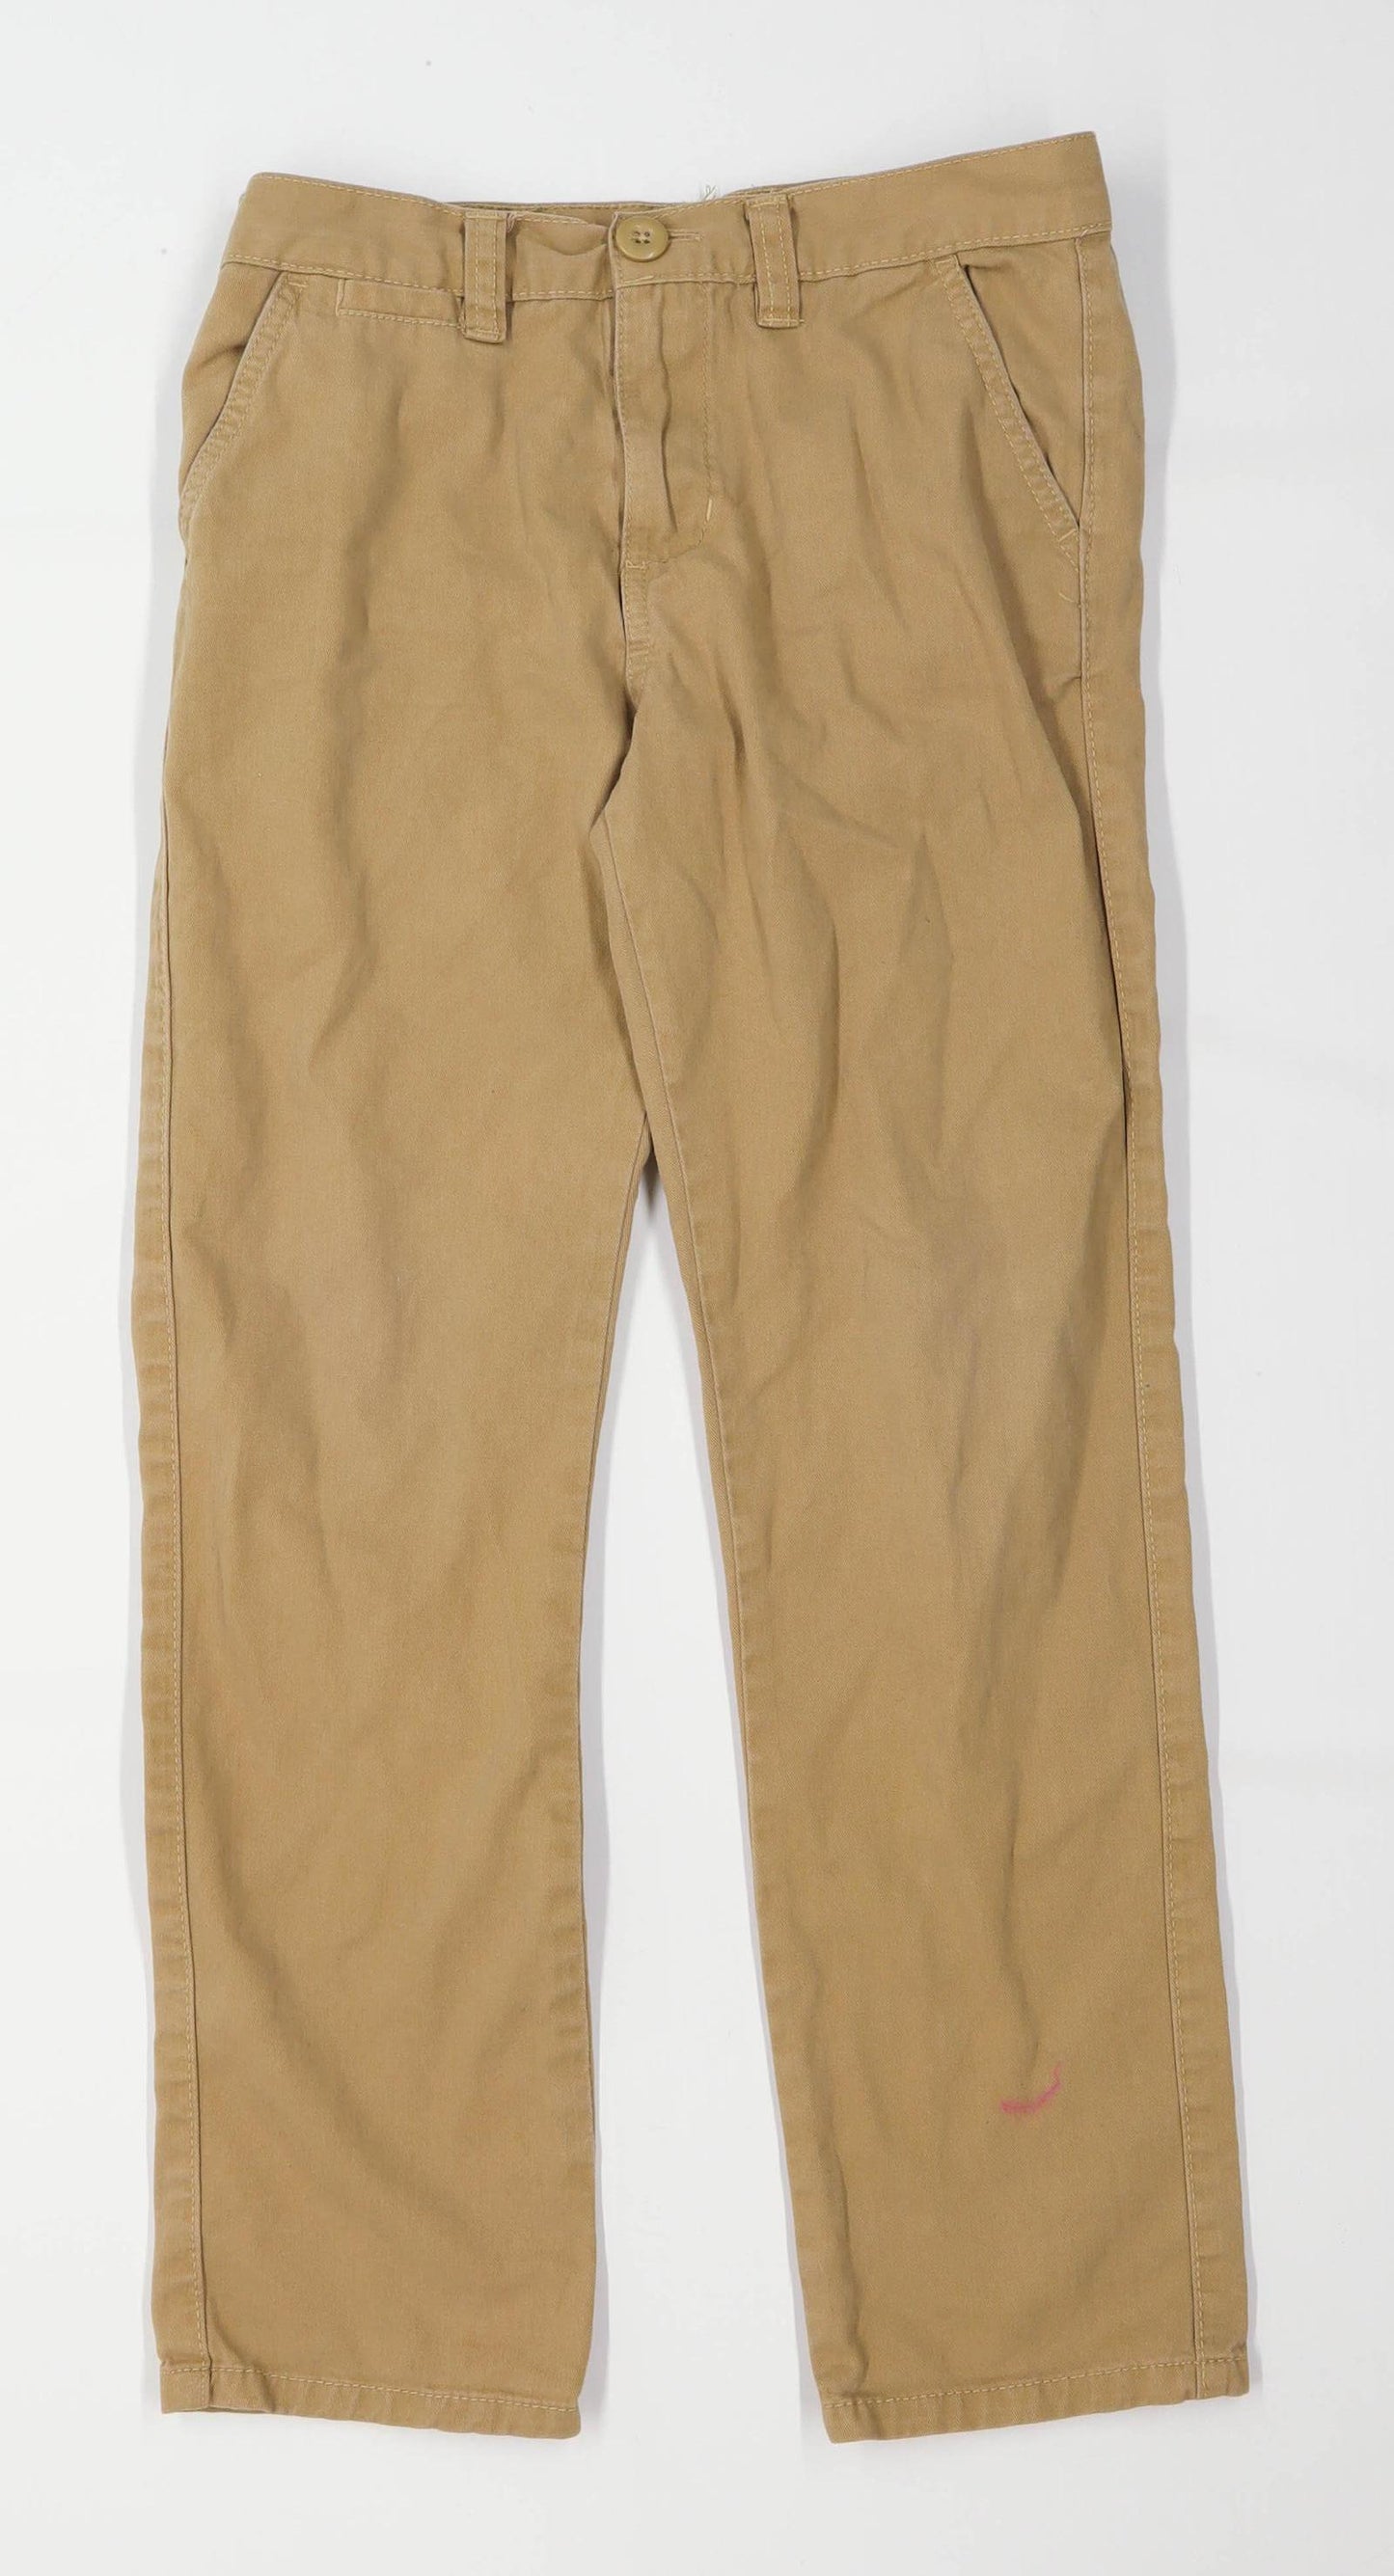 Primark Boys Beige Slim Fit Chino Trousers Age 10-11 Years